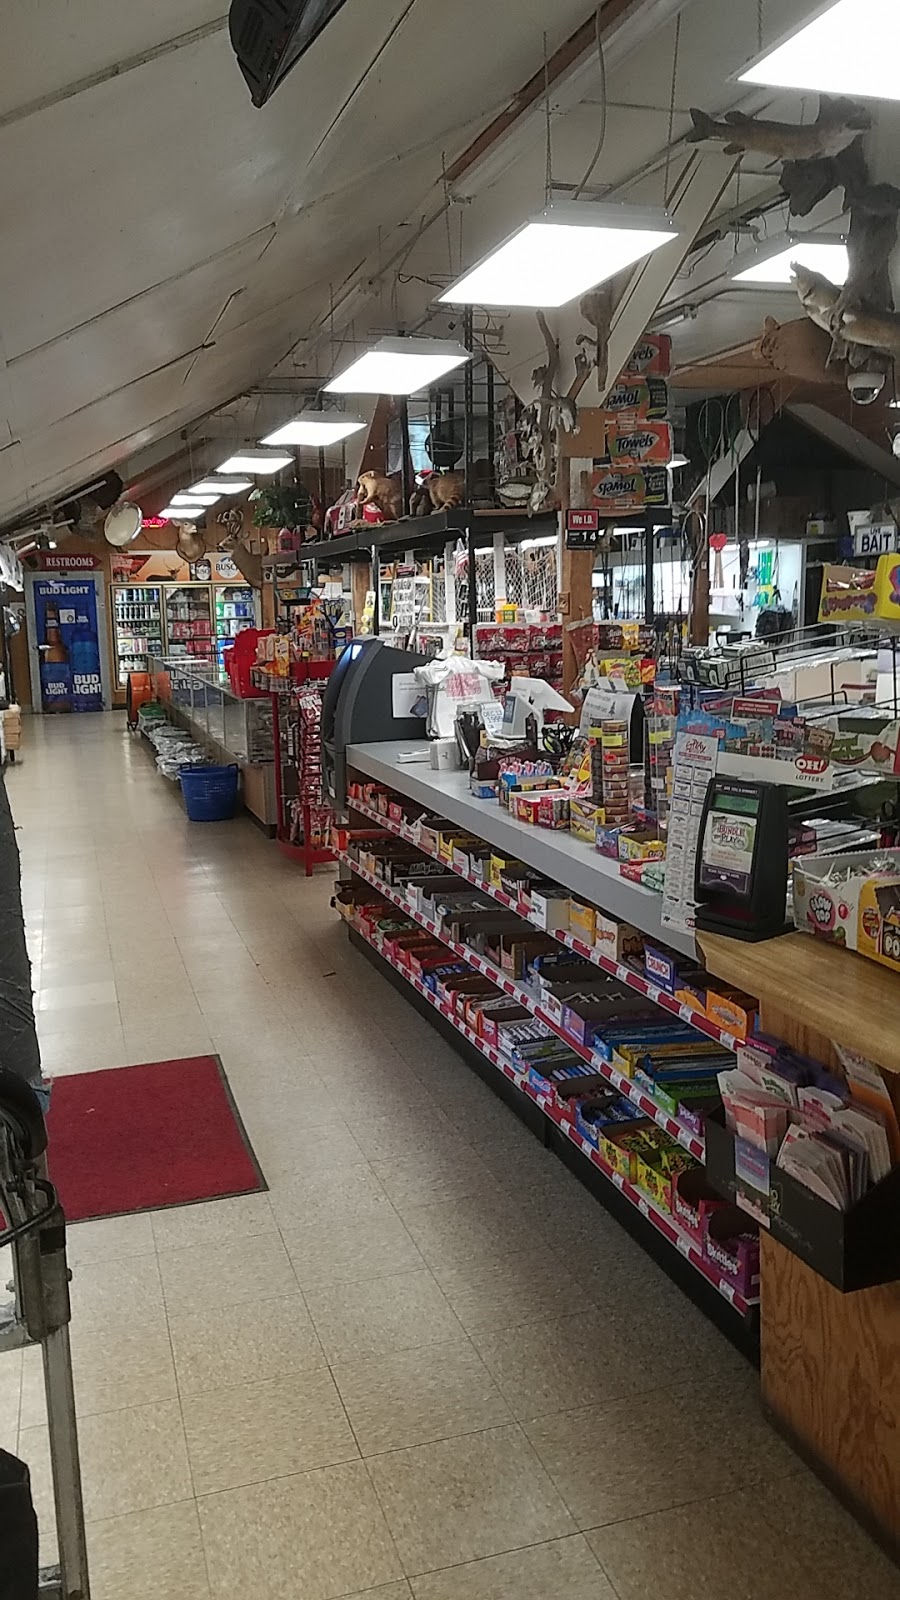 Frosties Bait & Tackle | 14761 Crownover Mill Rd, New Holland, OH 43145, USA | Phone: (740) 506-4937